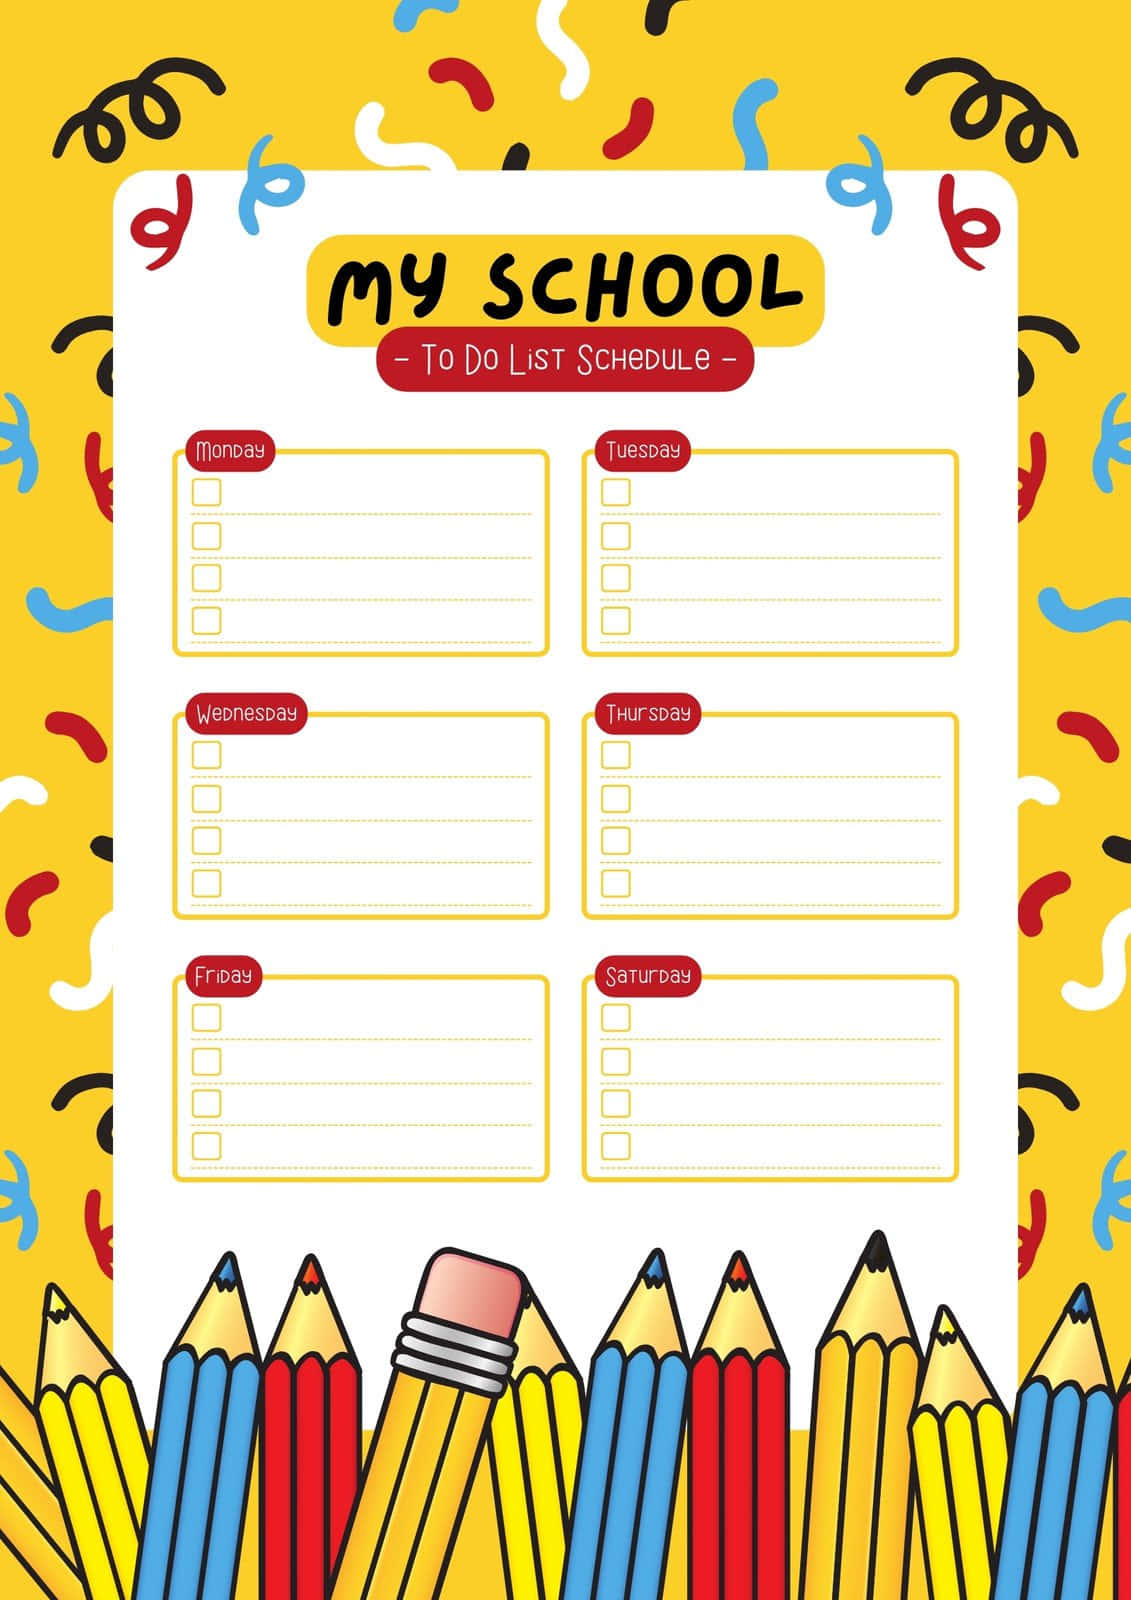 School Picture Background In To-Do-List